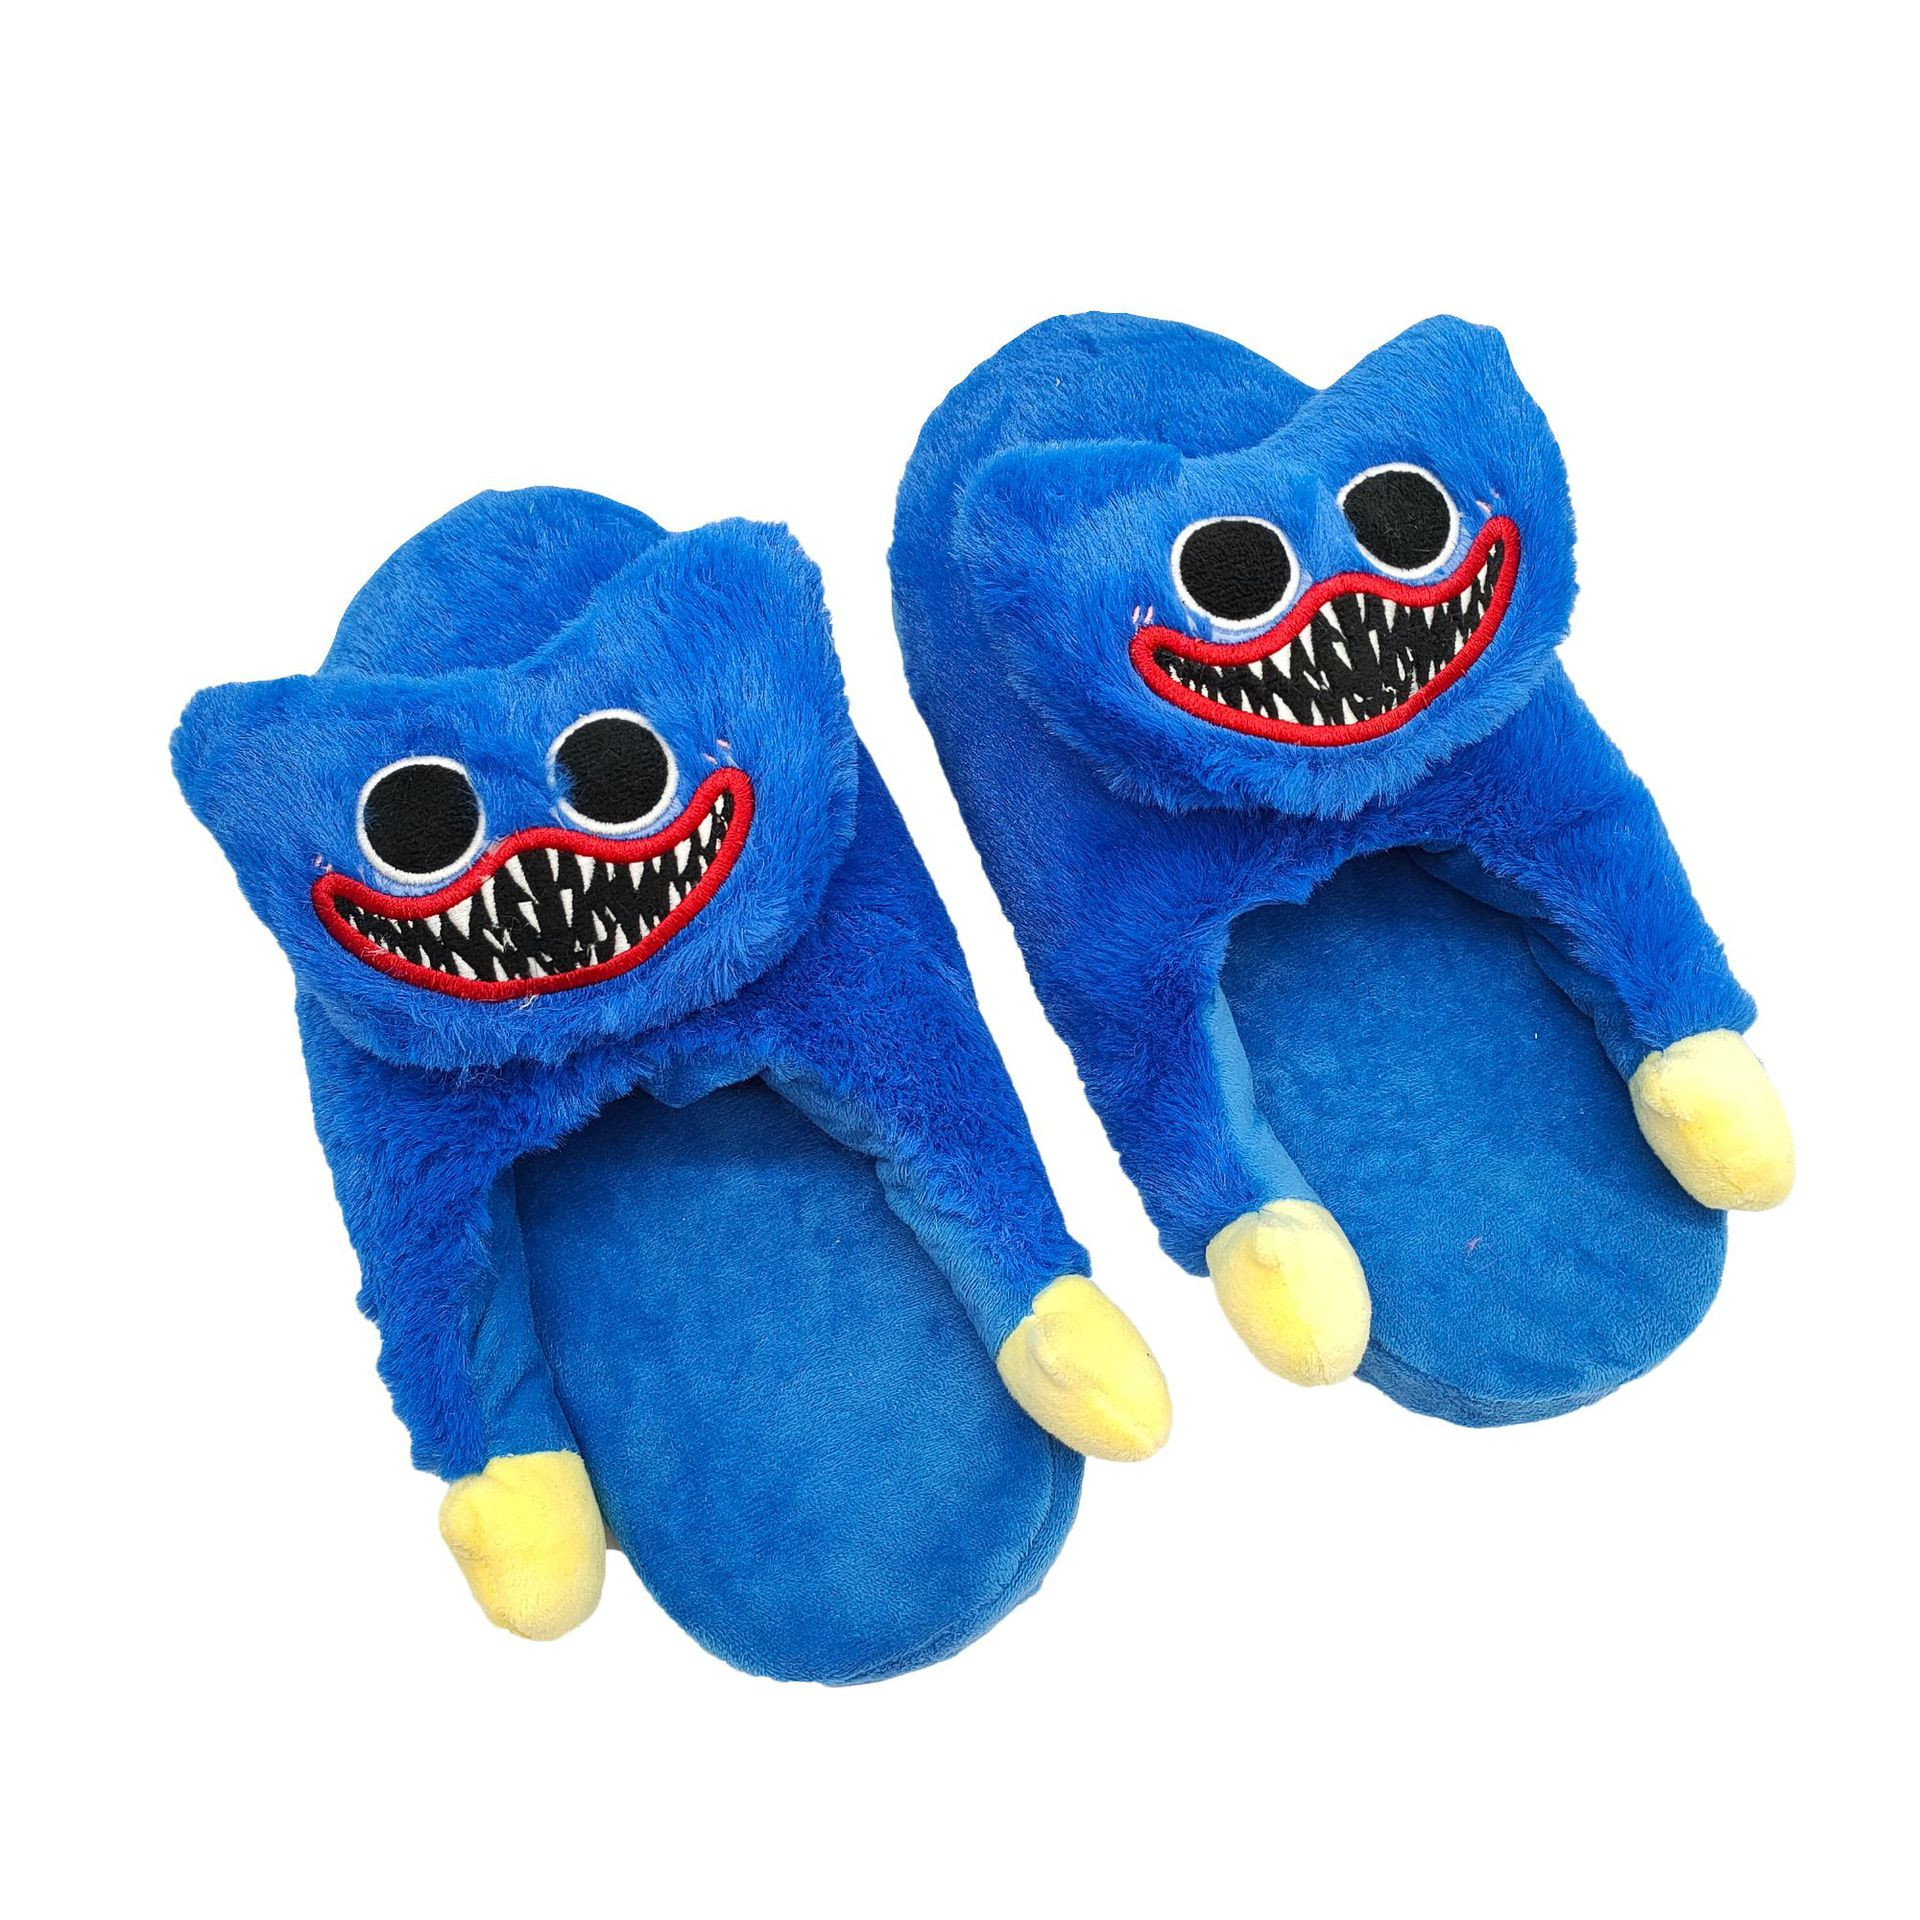 Poppy Playtime Huggy Wuggy Slippers